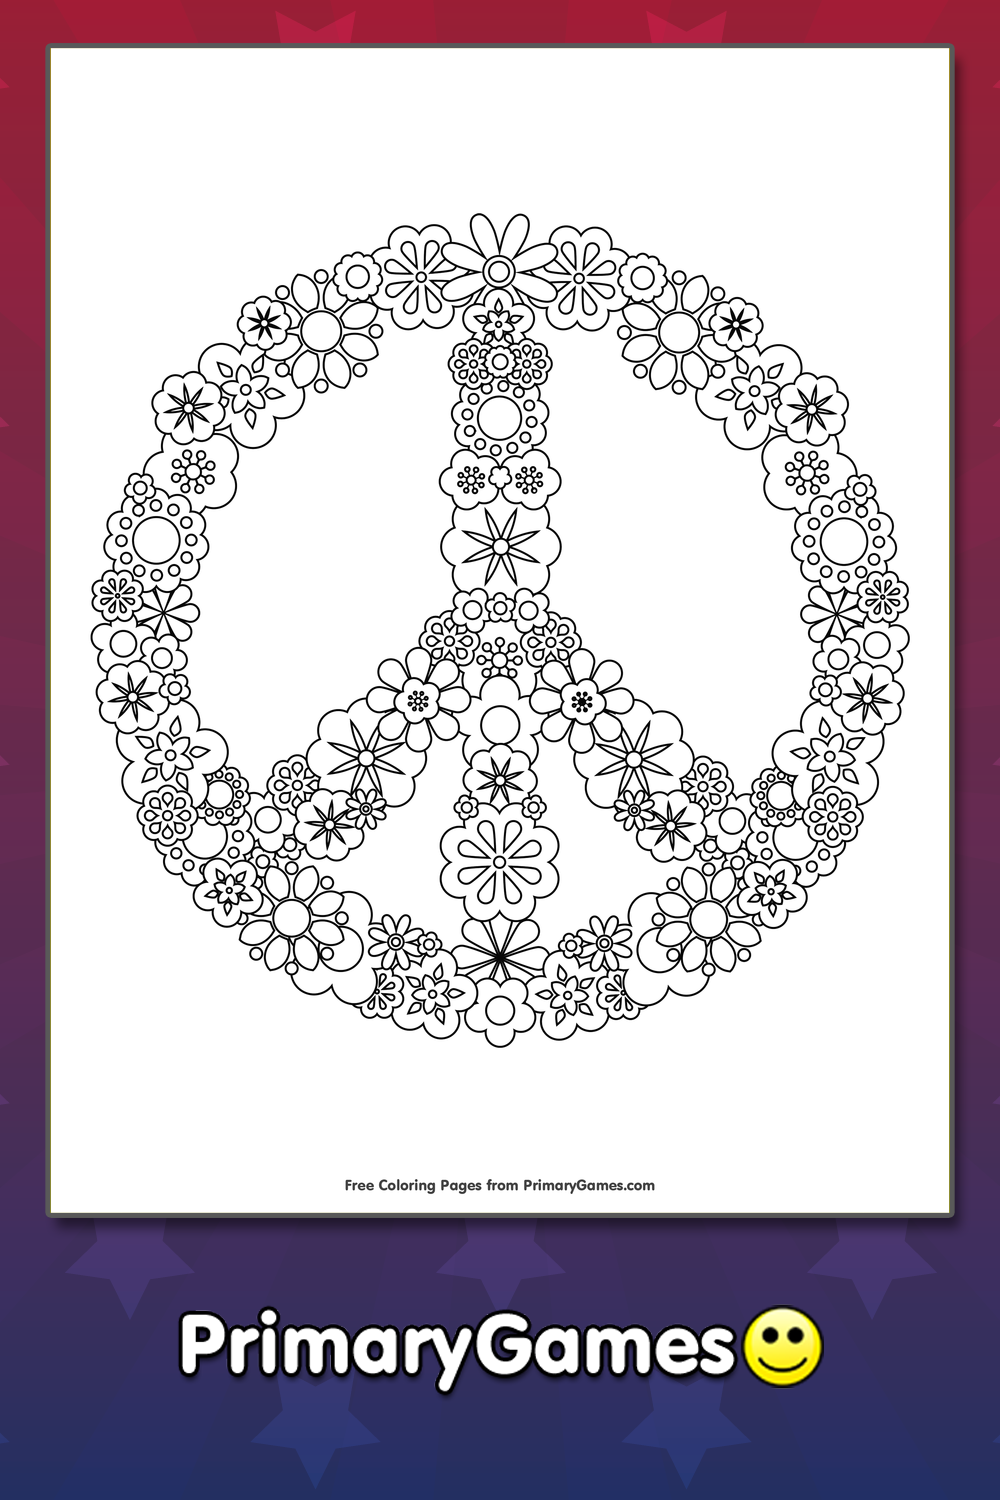 peace flower coloring pages